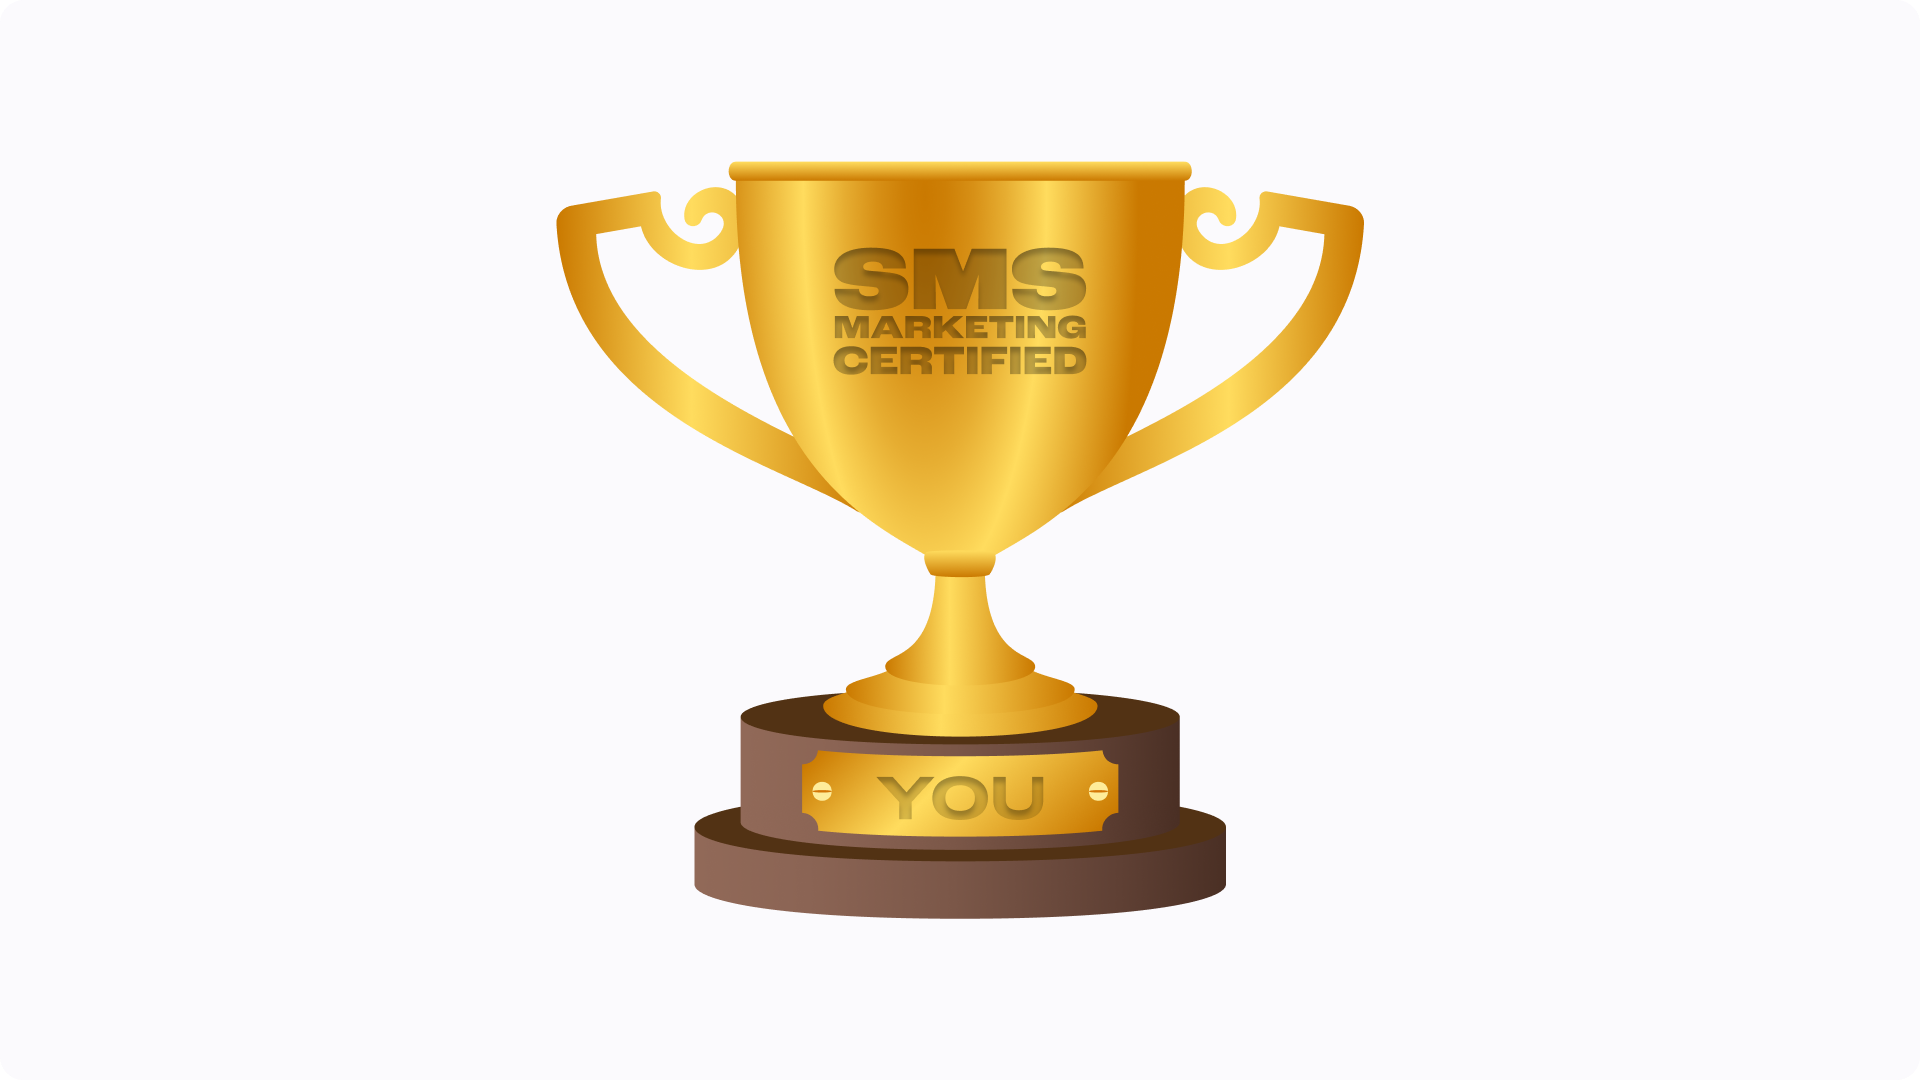 SMS marketing certification